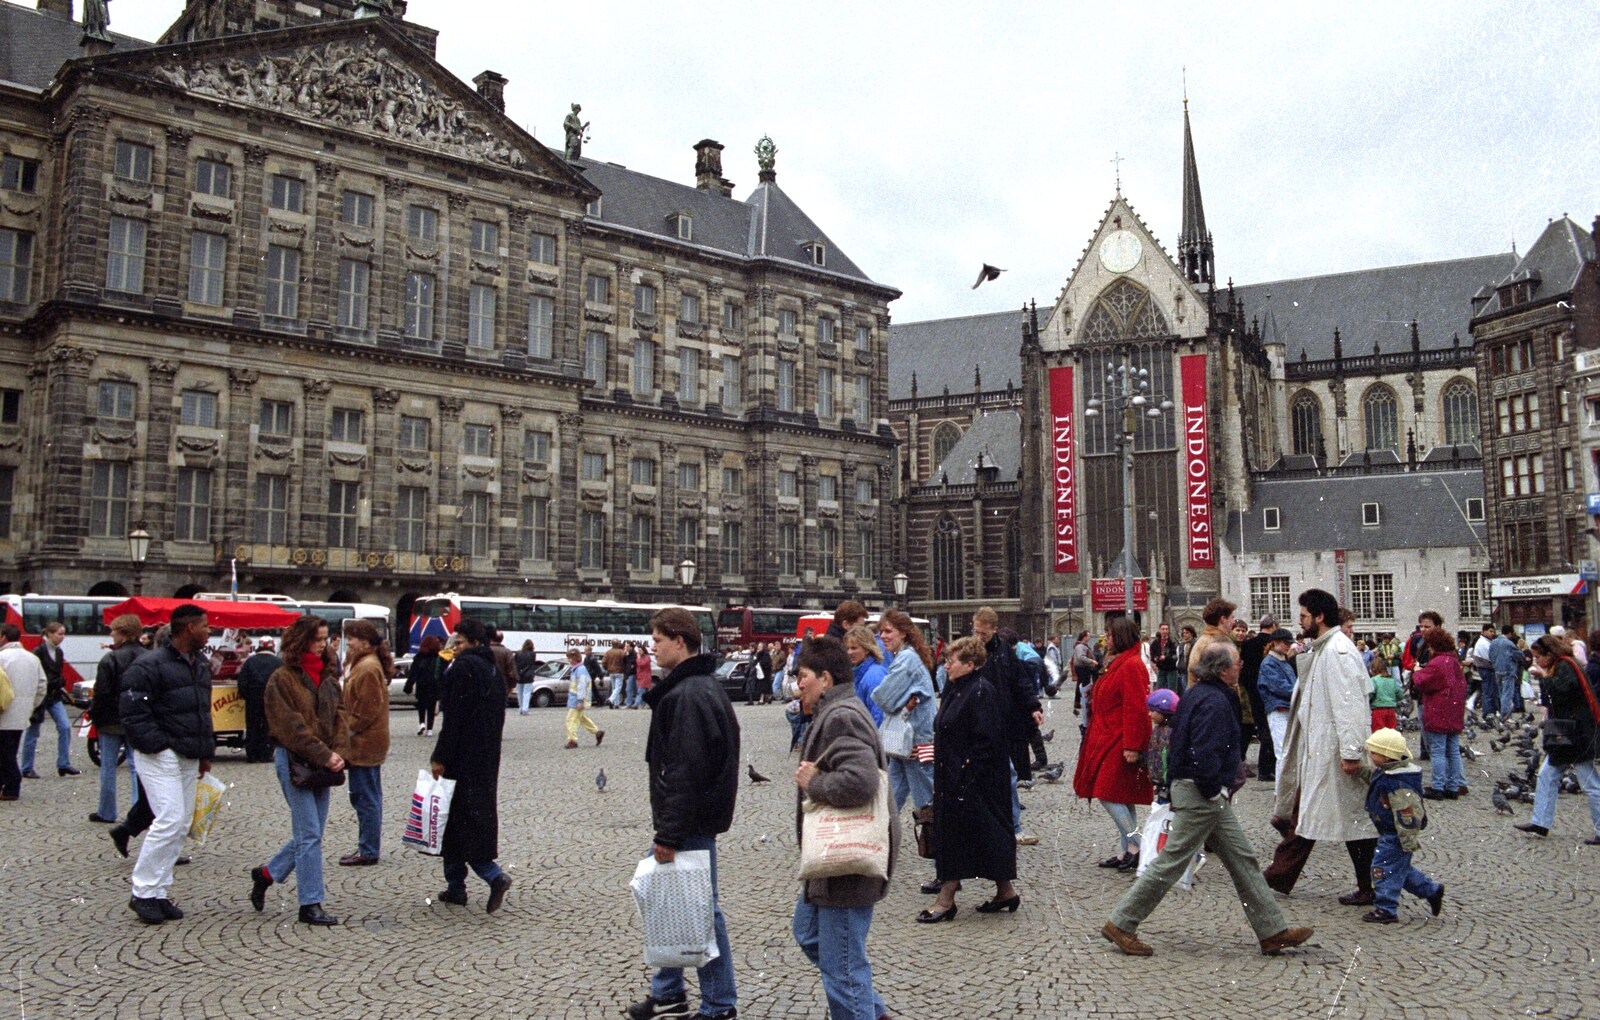 Out and About in Amsterdam, Hoorne, Vollendam and Edam, The Netherlands - 26th March 1992: Some main square